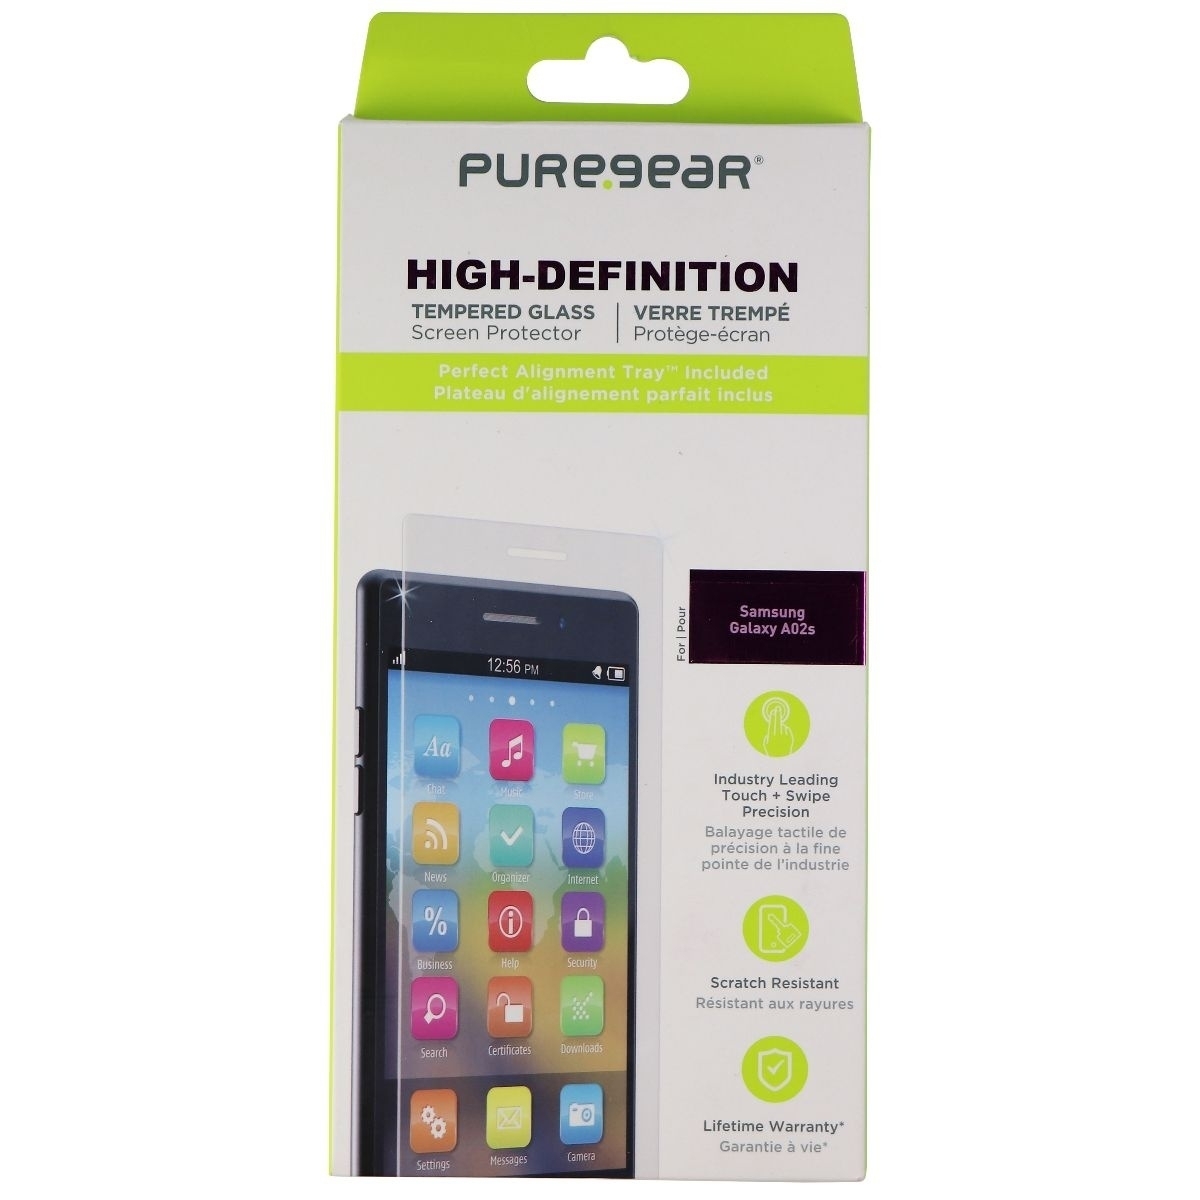 PureGear HD Tempered Glass Screen Protector For Samsung Galaxy A02s - Clear